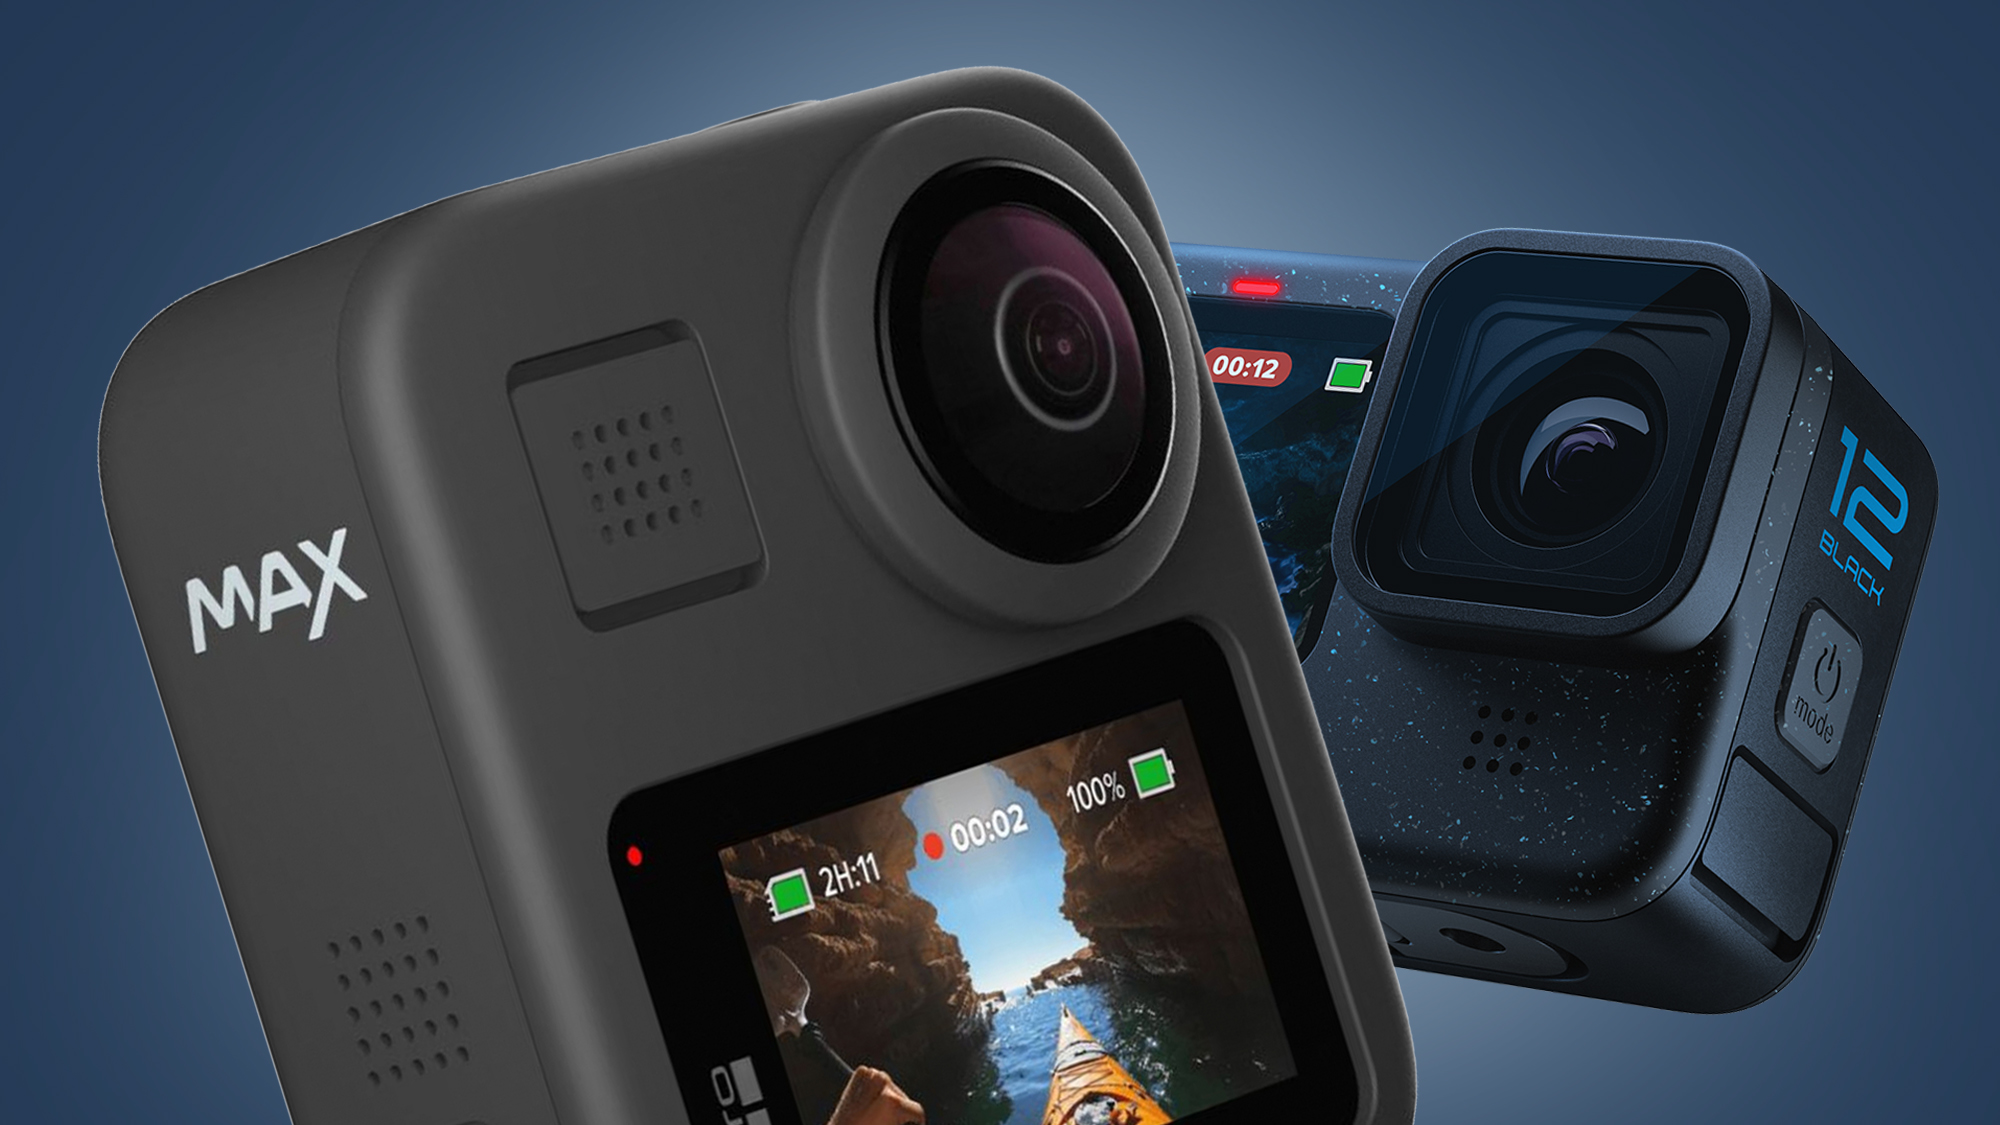 The GoPro Max and Hero 12 Black action cameras on a blue background